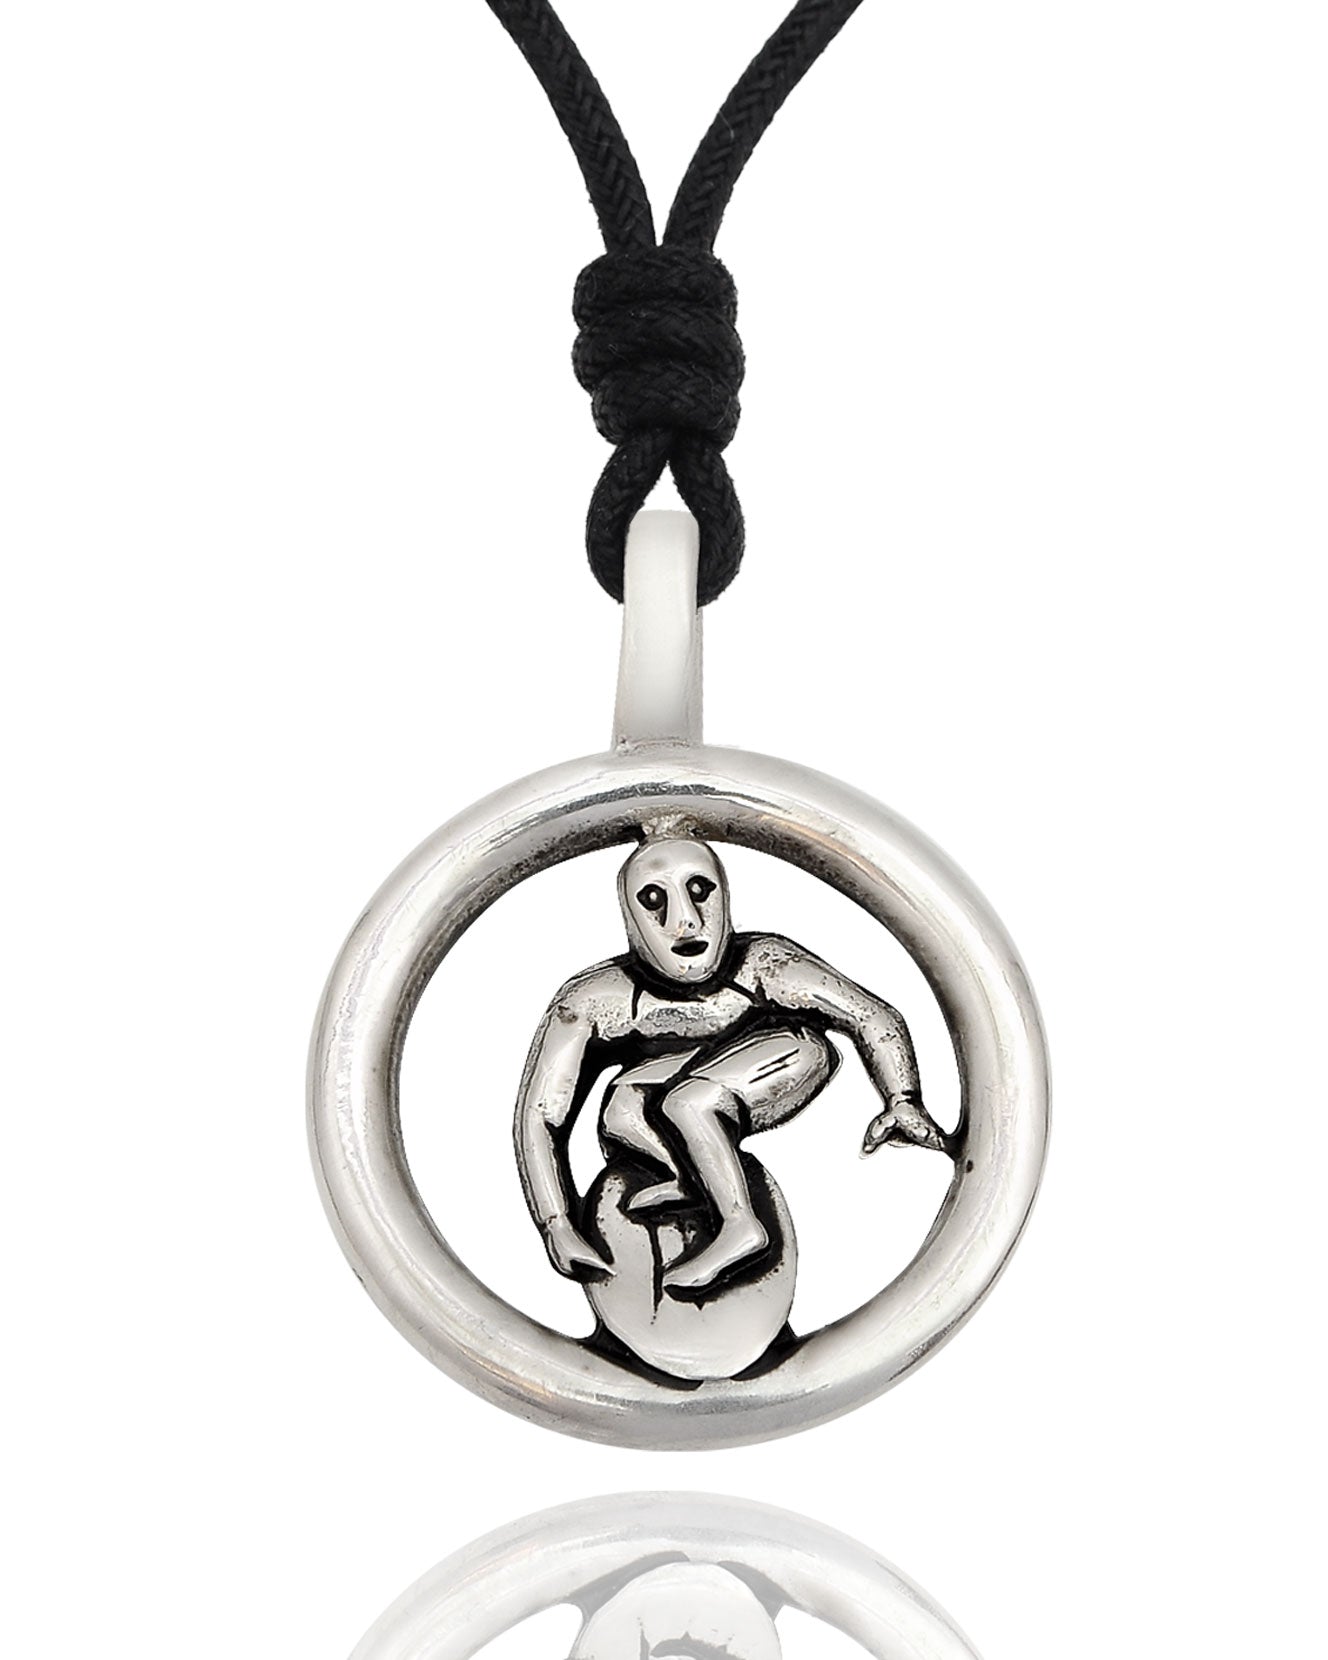 Surfer Silver Pewter Charm Necklace Pendant Jewelry